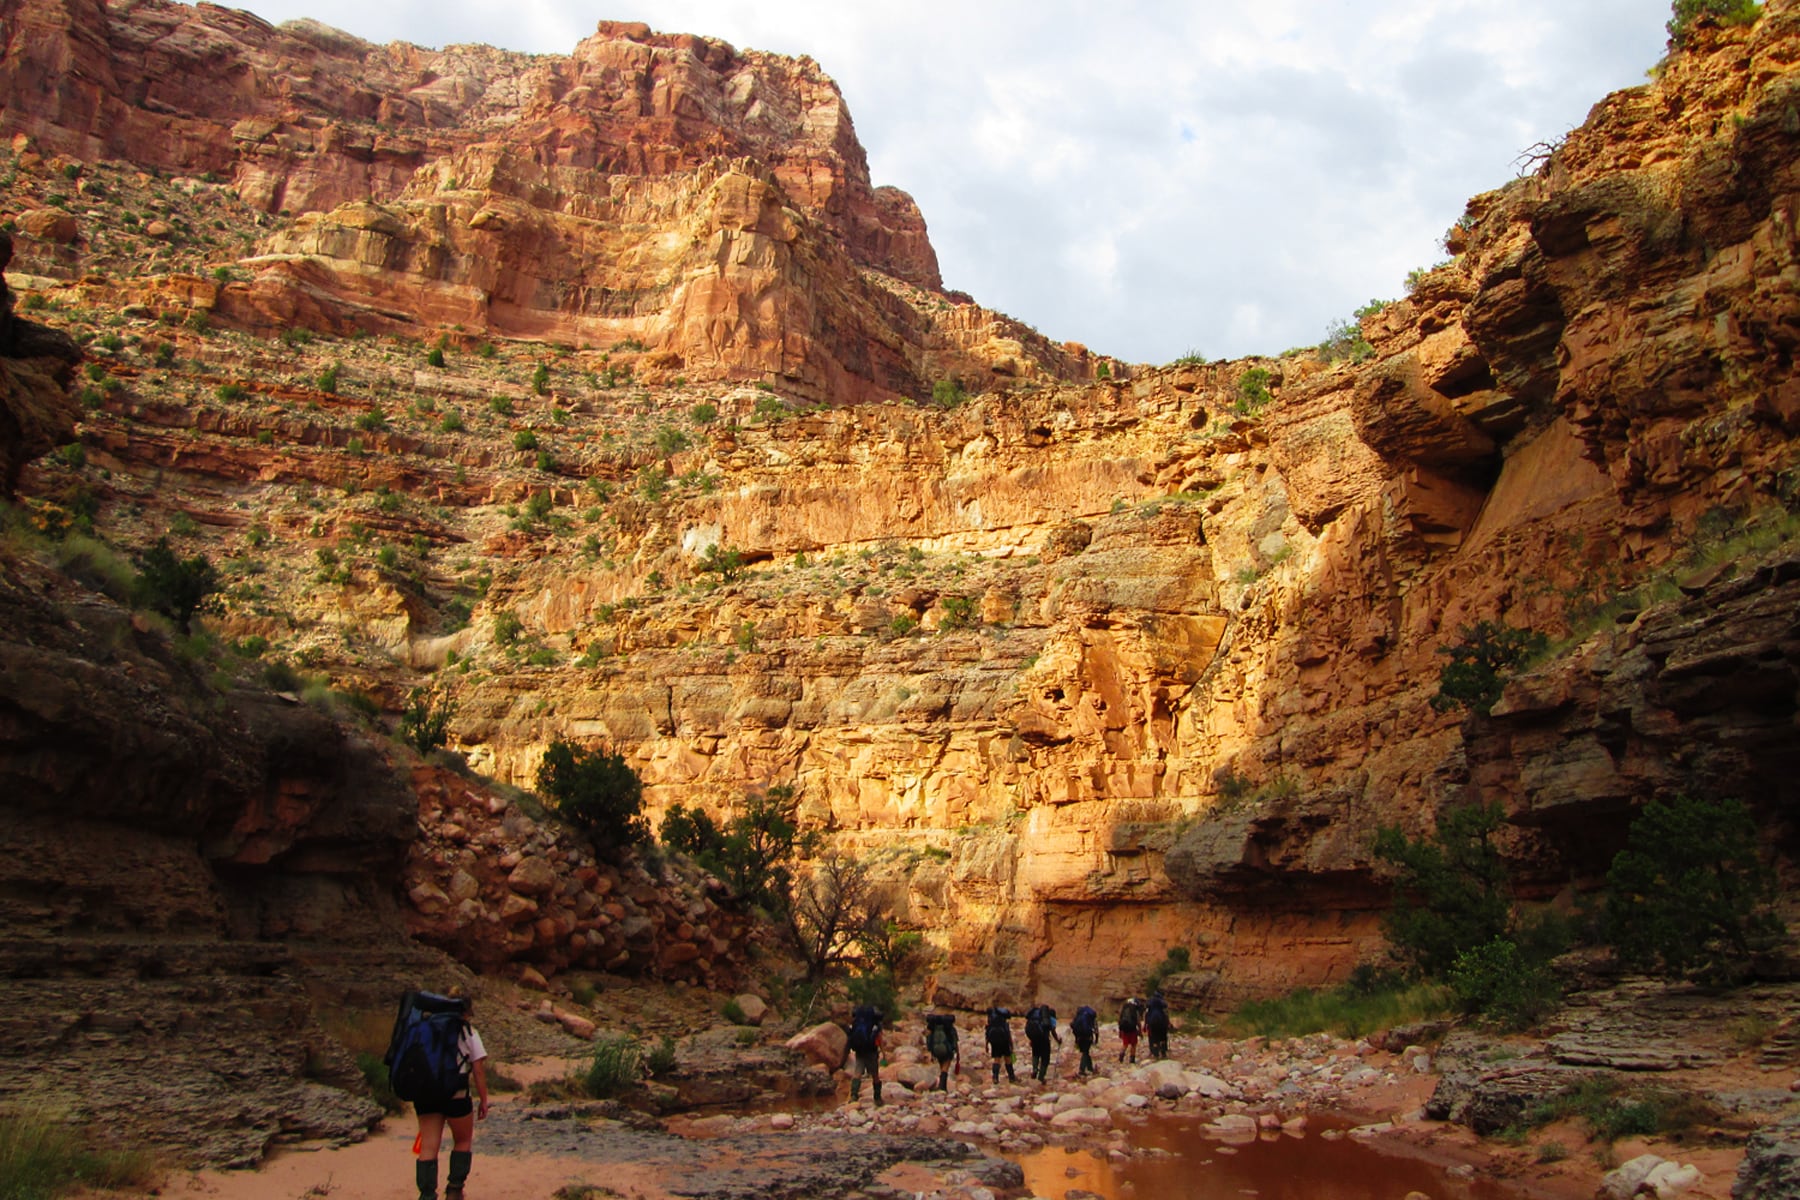 Canyon backpacking summer wilderness adventure for teens